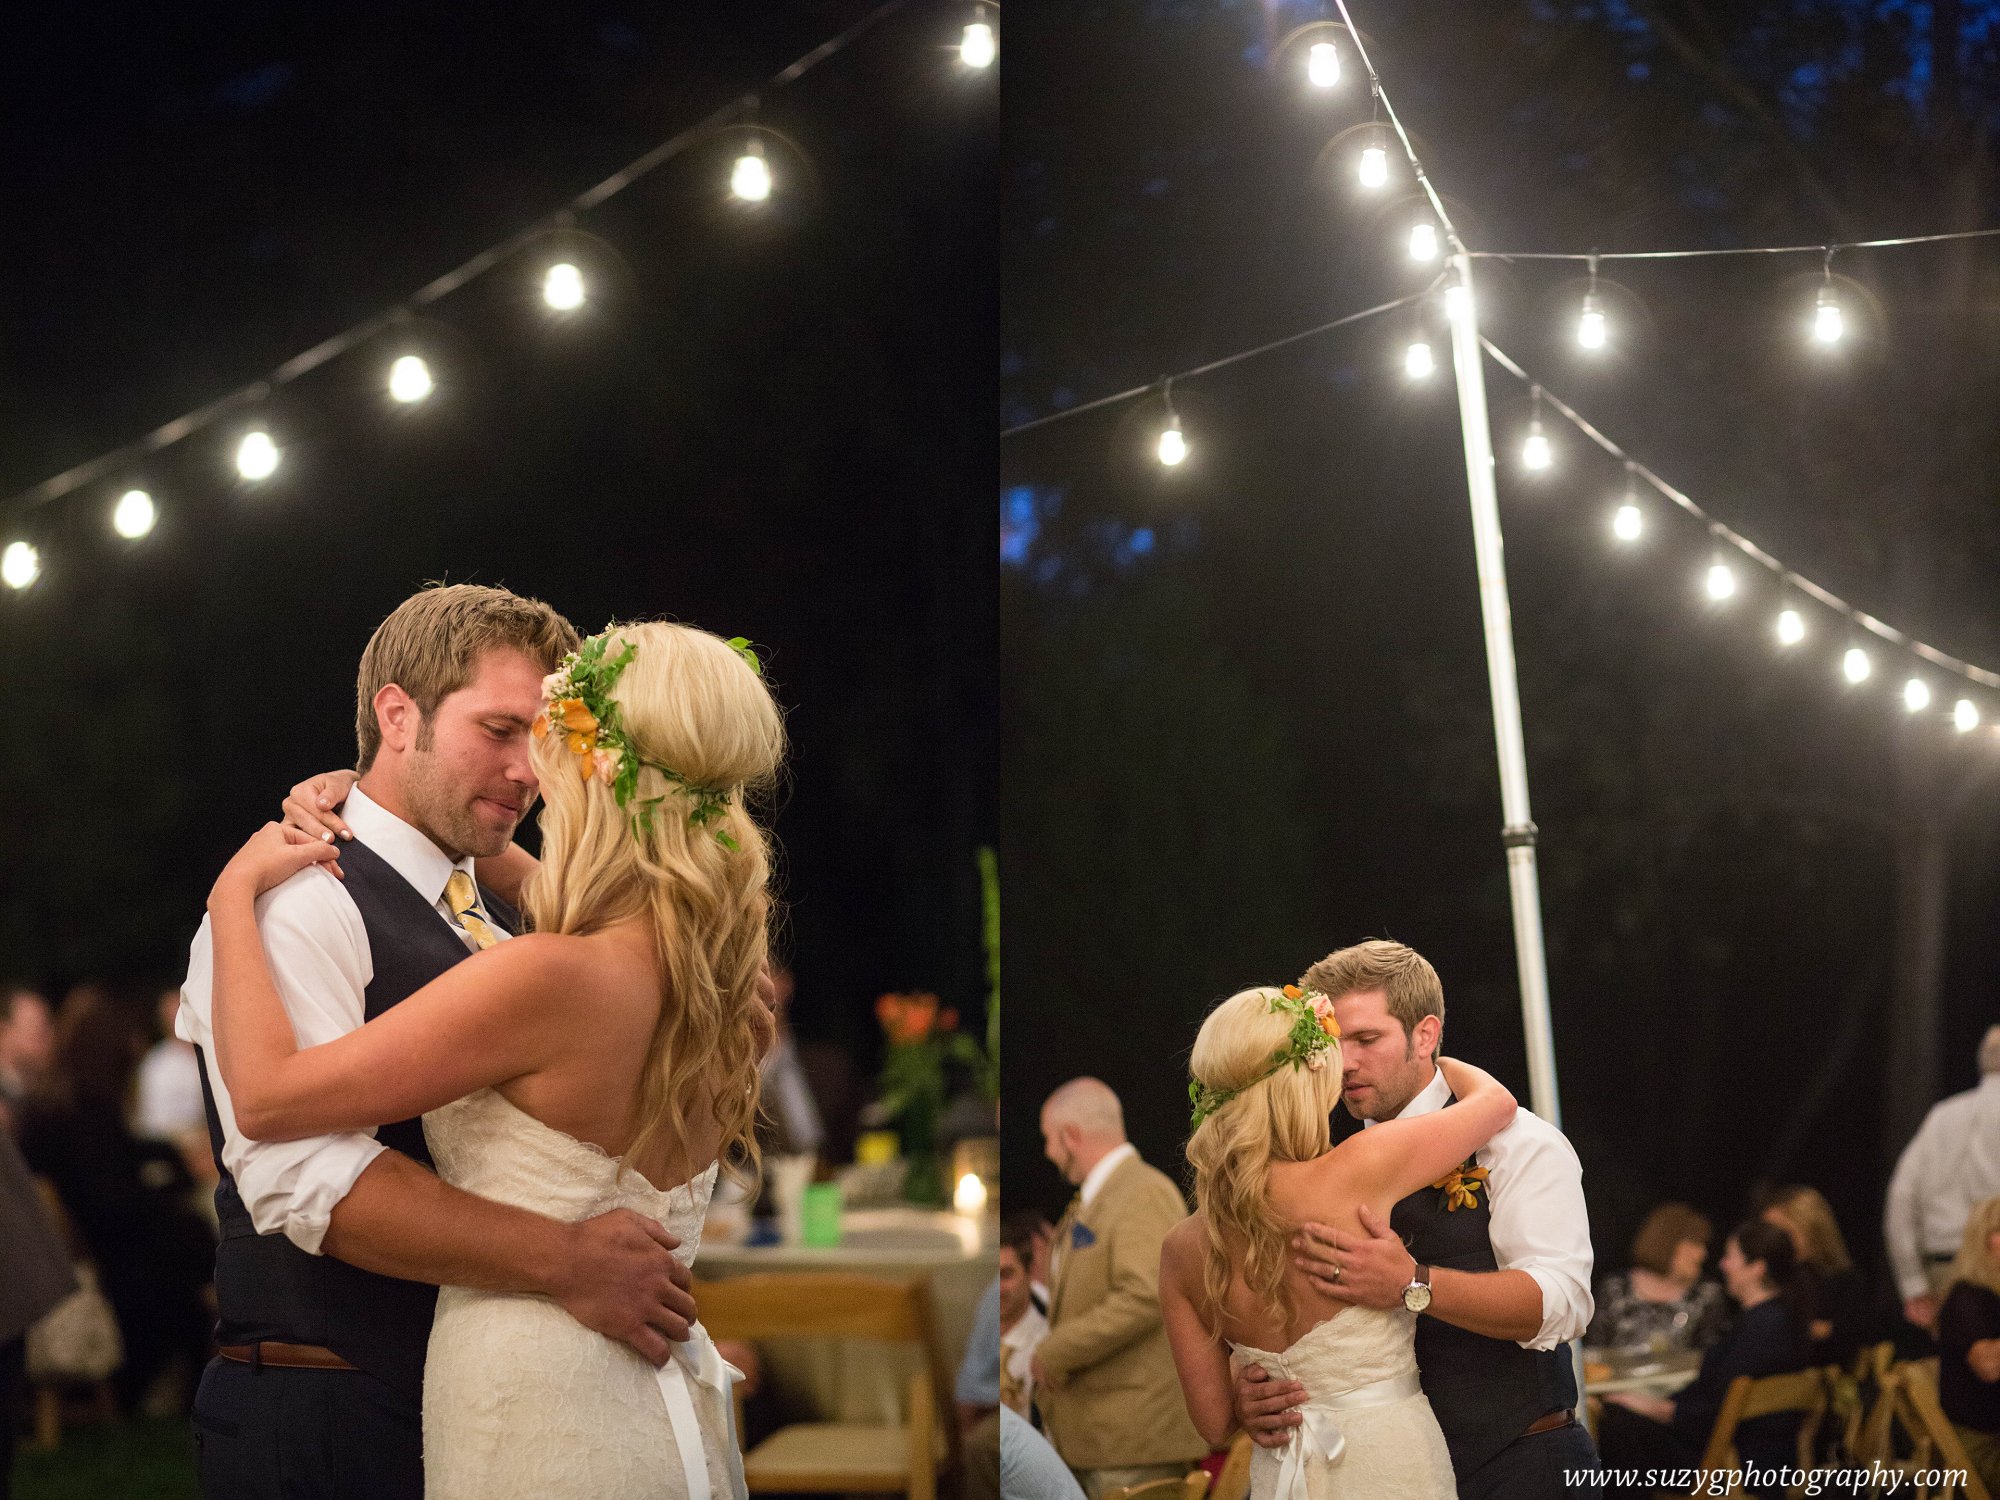 View More: http://suzygphotography.pass.us/kbcook-ellen--shane-wedding